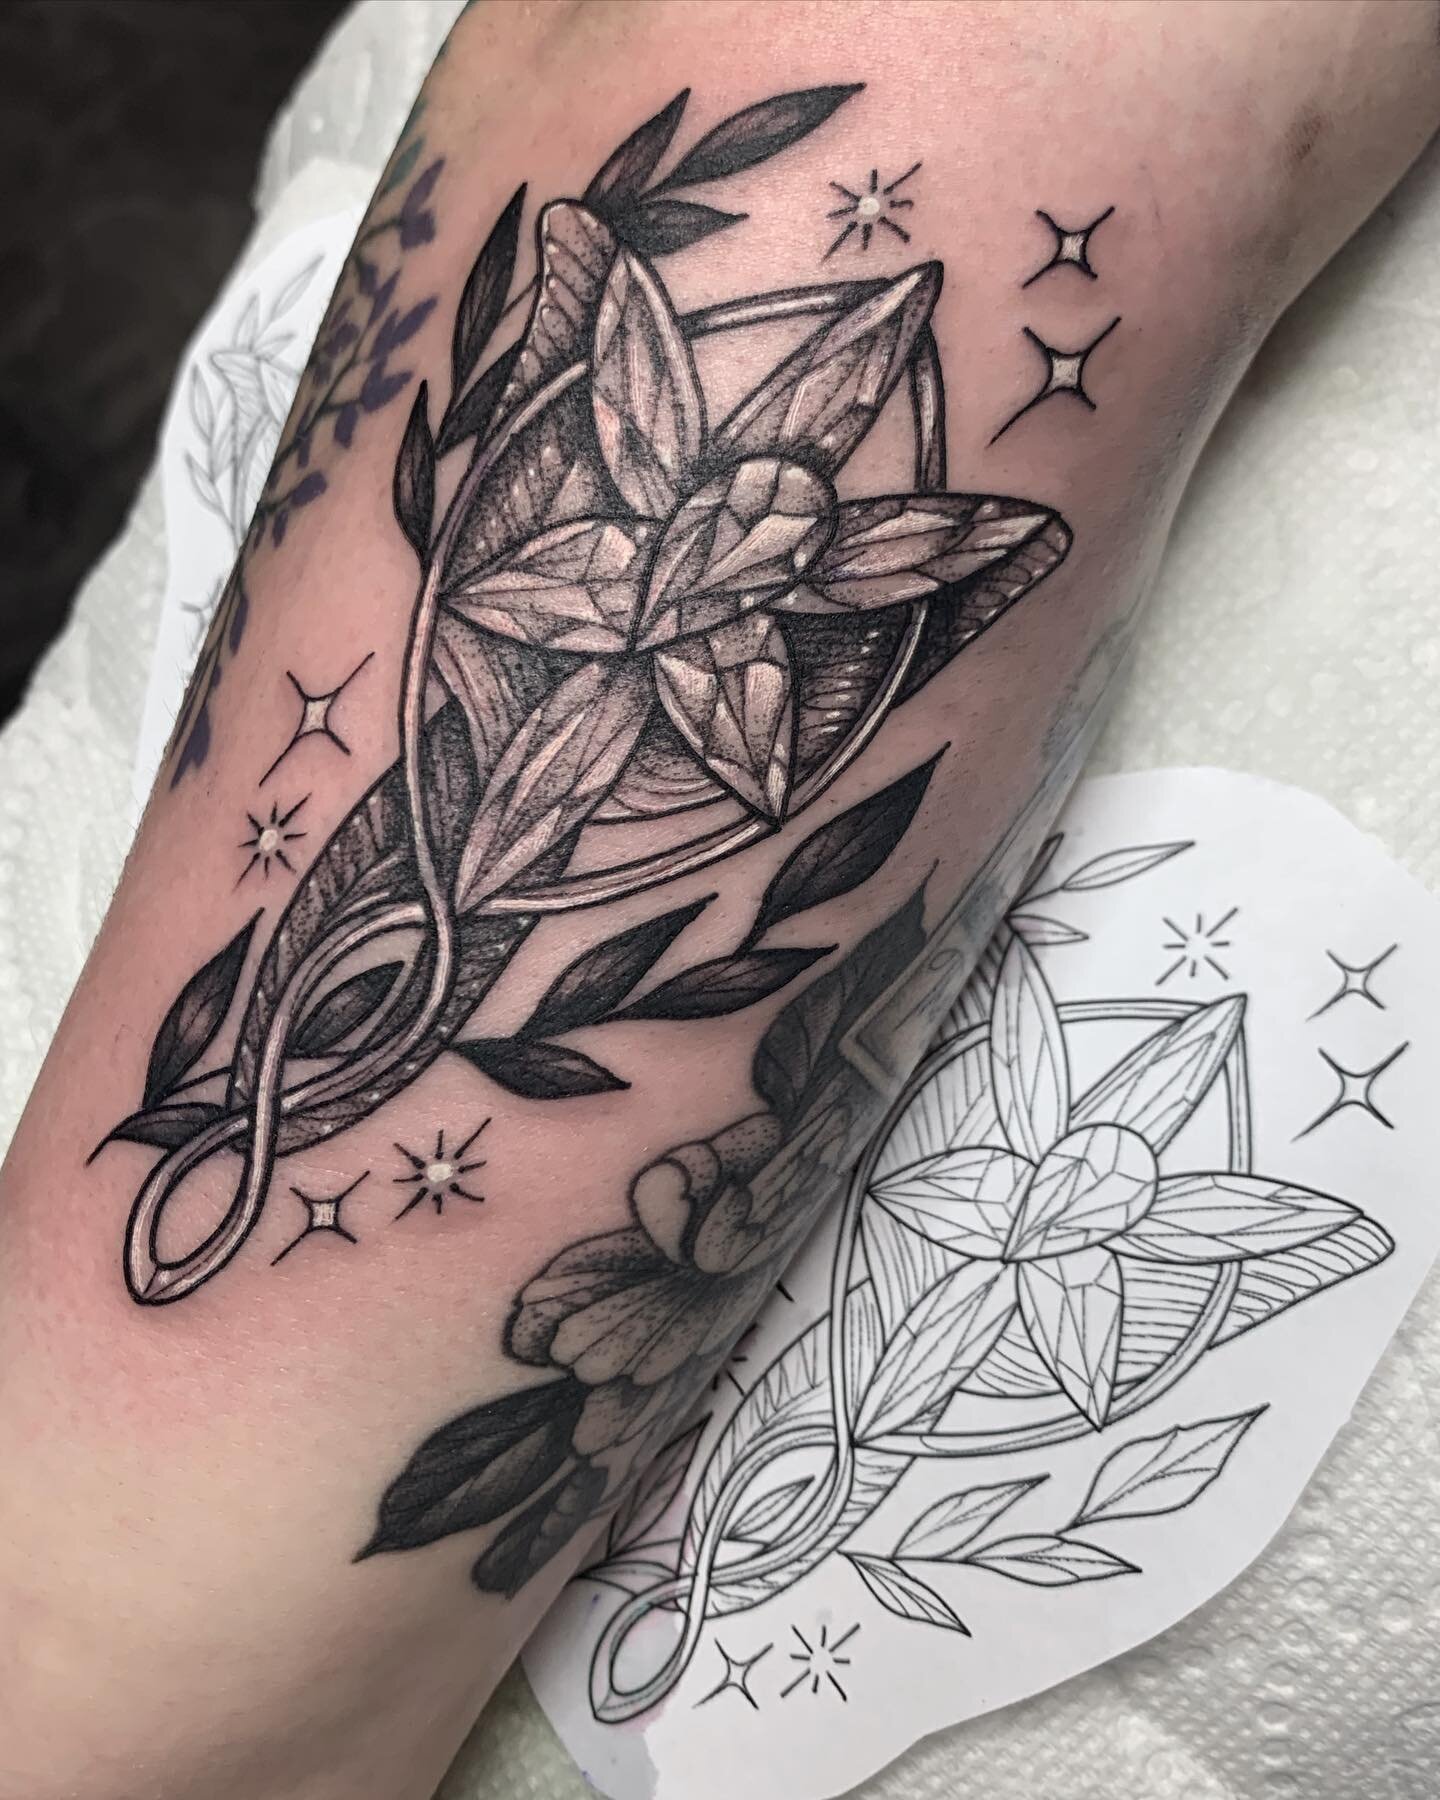 A favorite of mine✨now booking end of June through July ✨ for ALL tattoo questions or inquires please email me at booking@atlisian.com ✨ I&rsquo;m limiting my social media time so DMs will not be responded to as quickly.